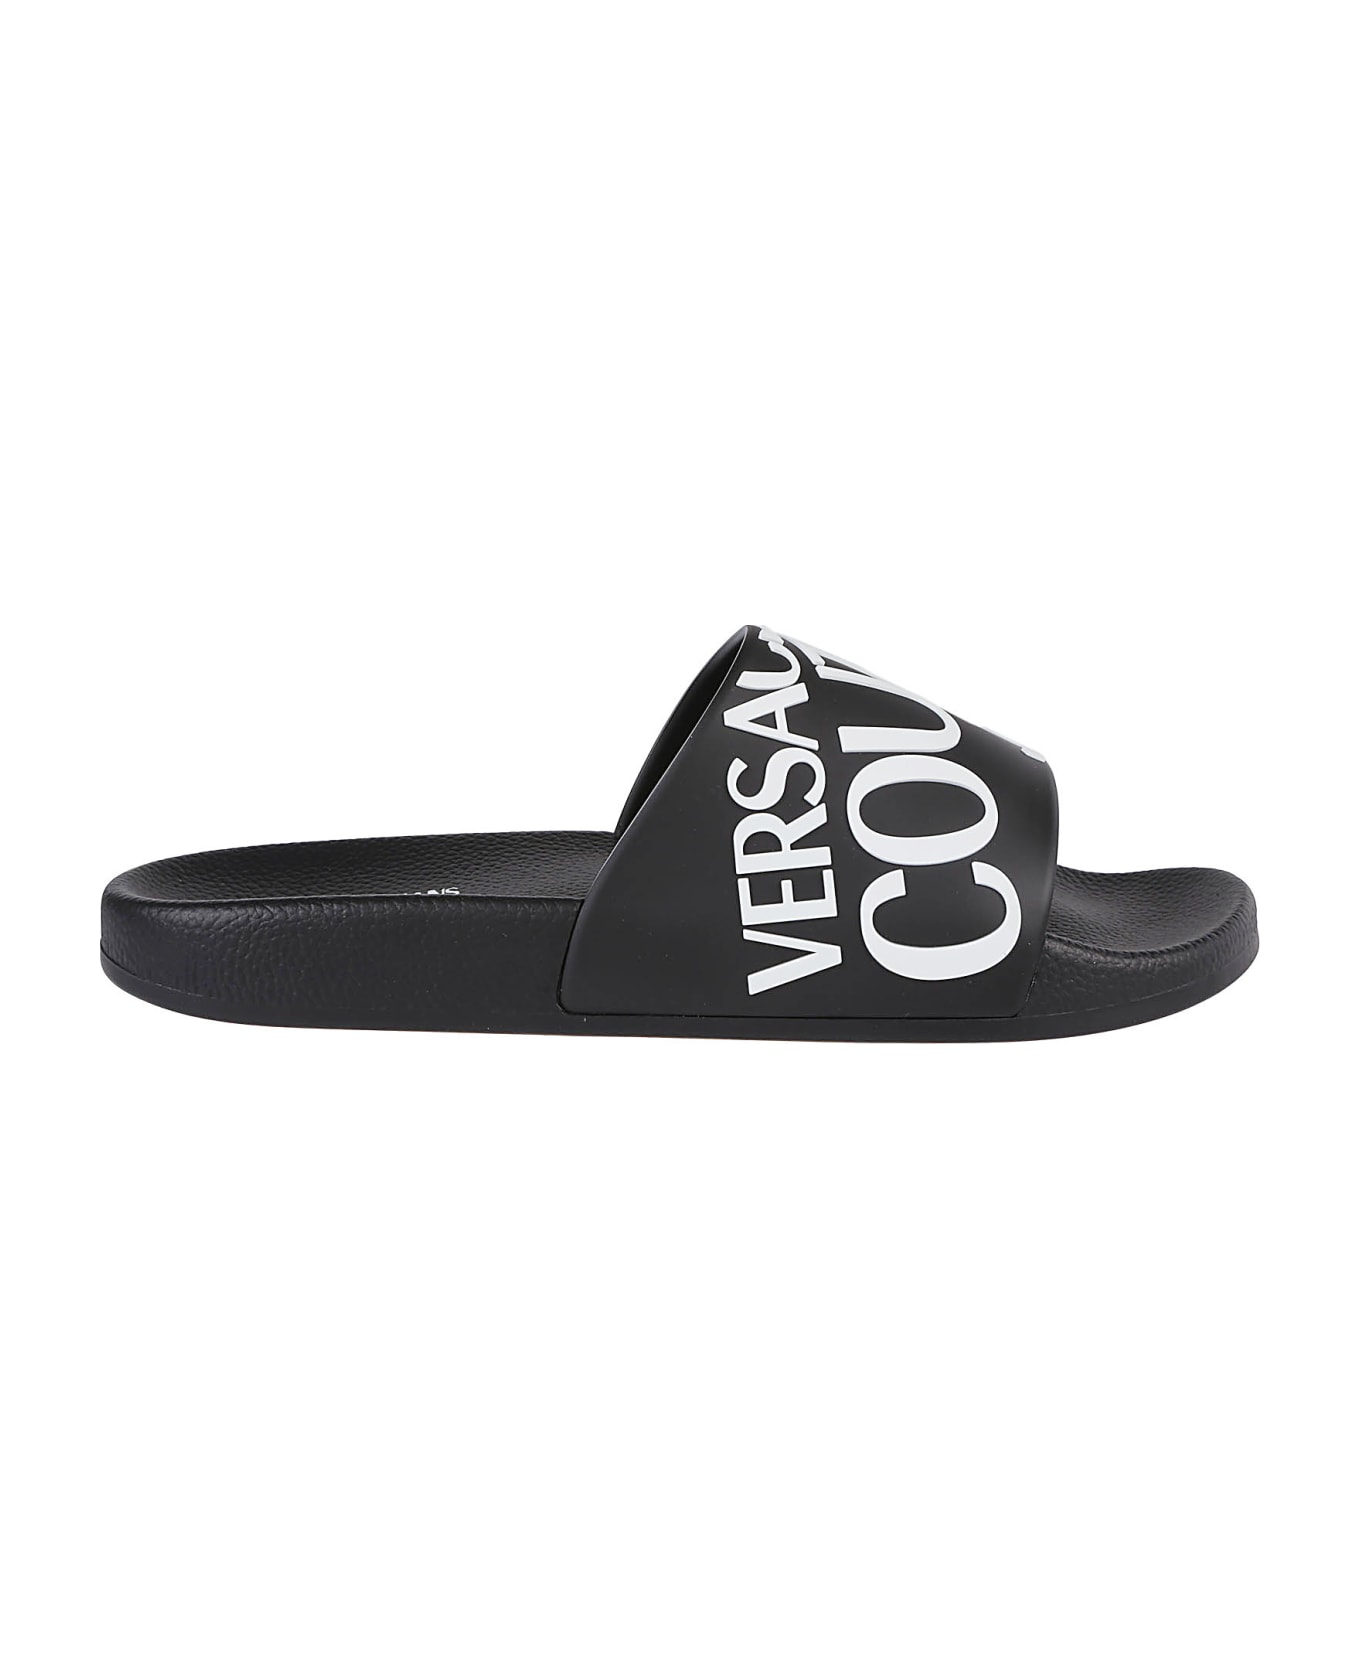 Versace Jeans Couture Gummy Sq1 Sliders - Black